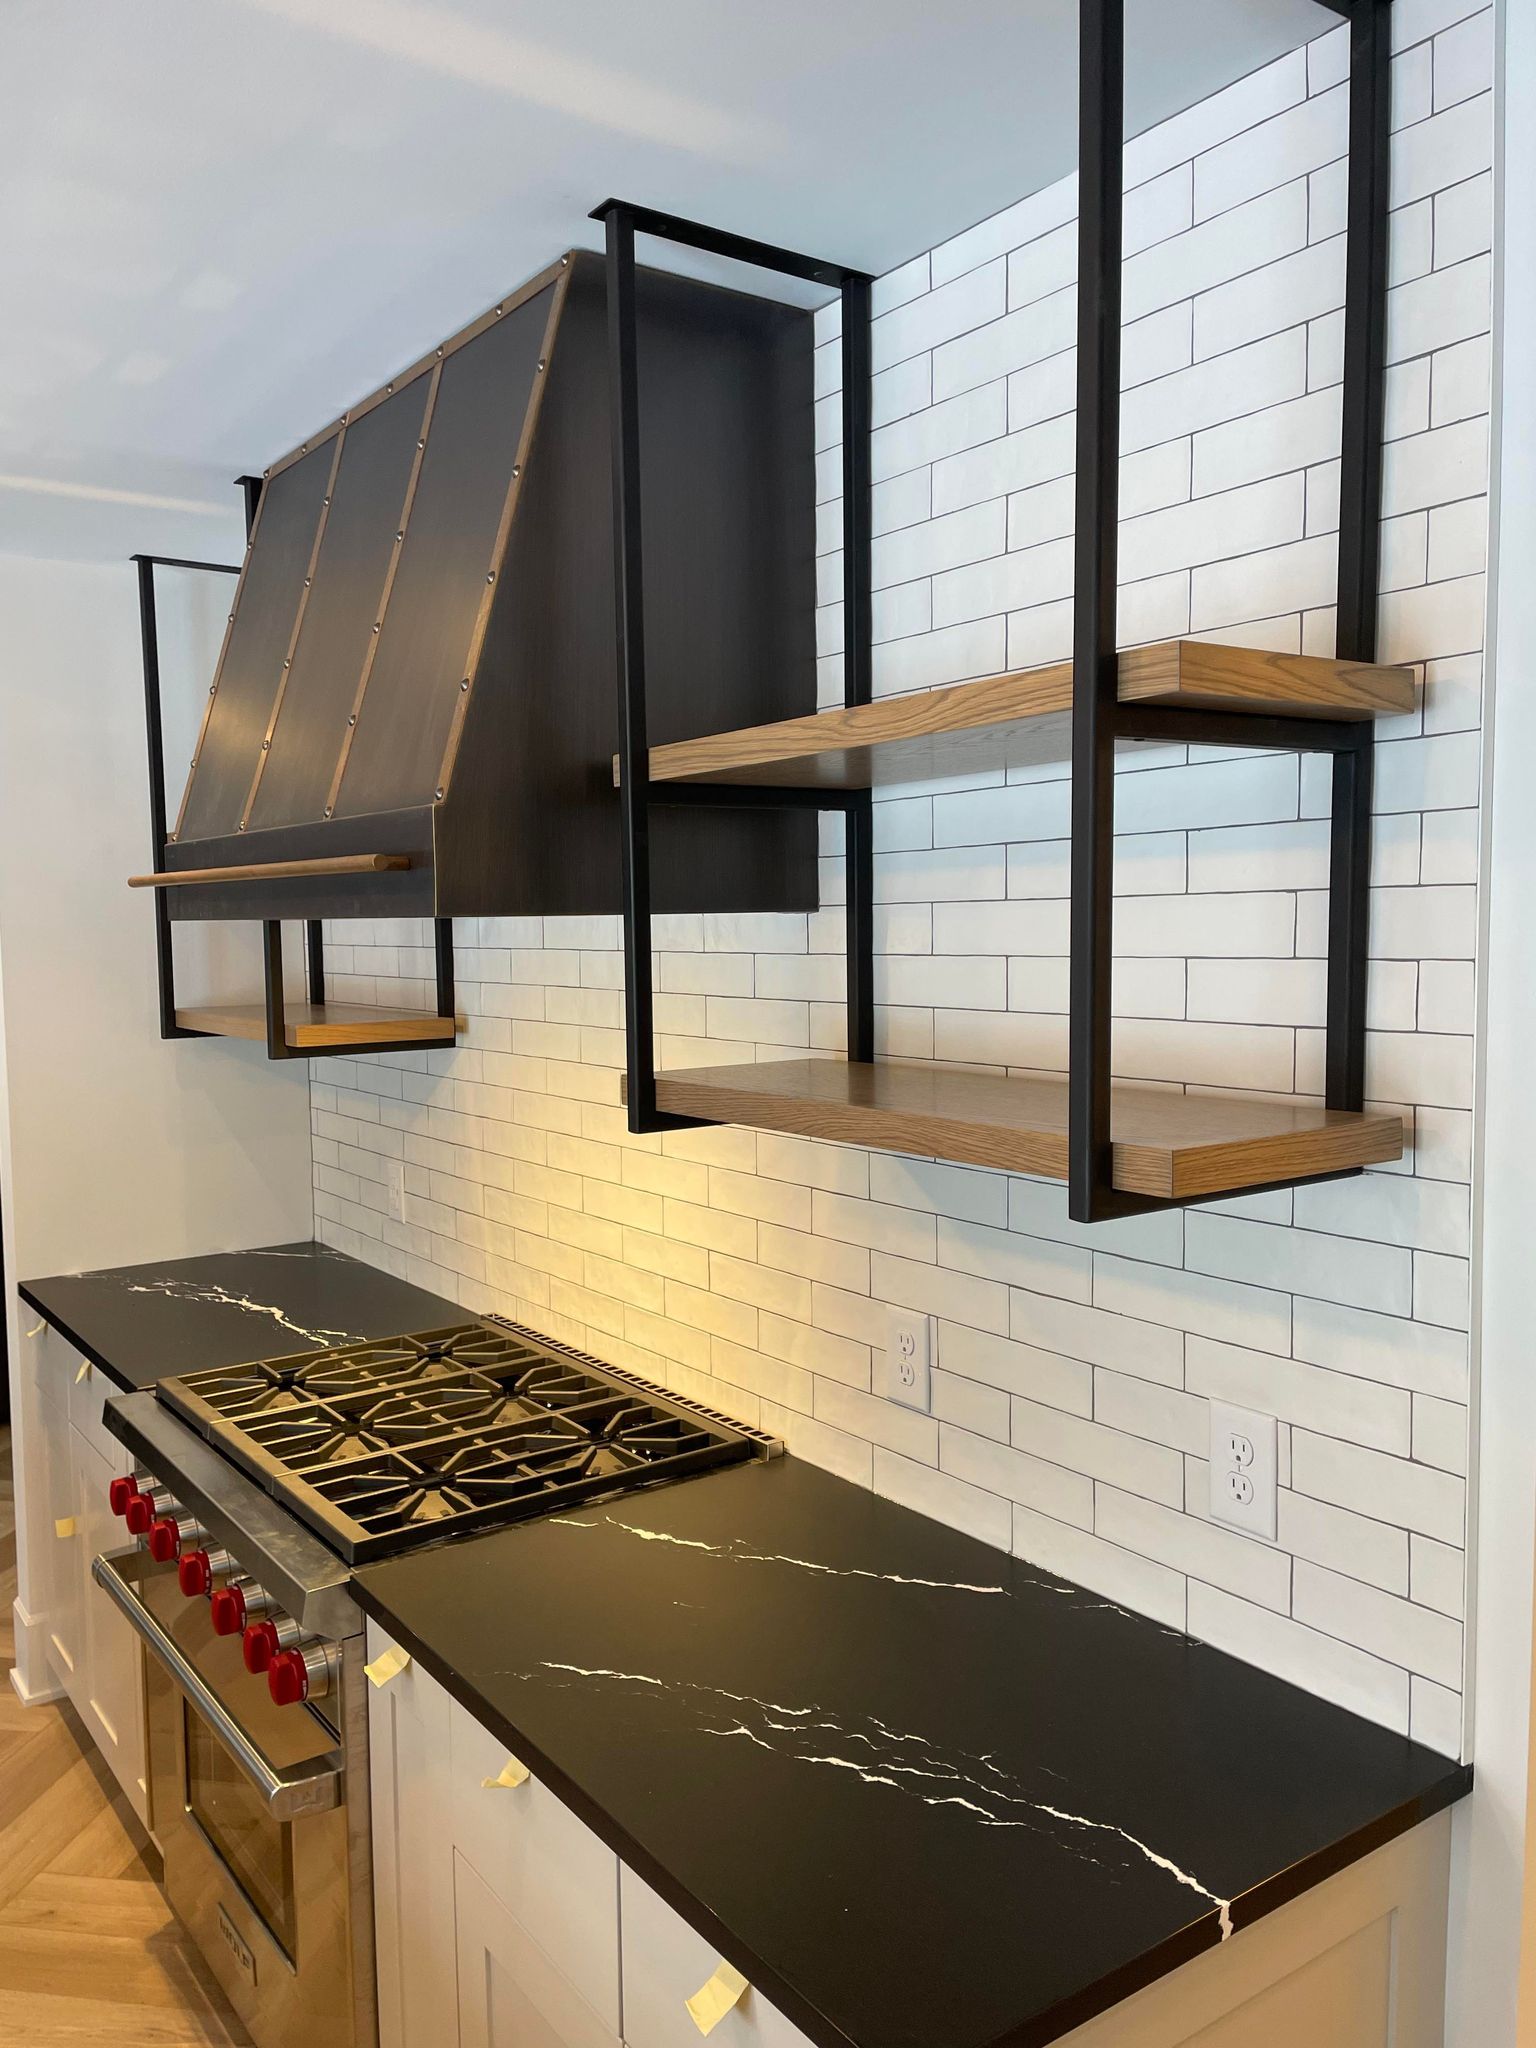 Sophisticated kitchen design idea, a french-inspired concept with white kitchen cabinets, black kitchen countertops, and white tile backsplash stylish range hood